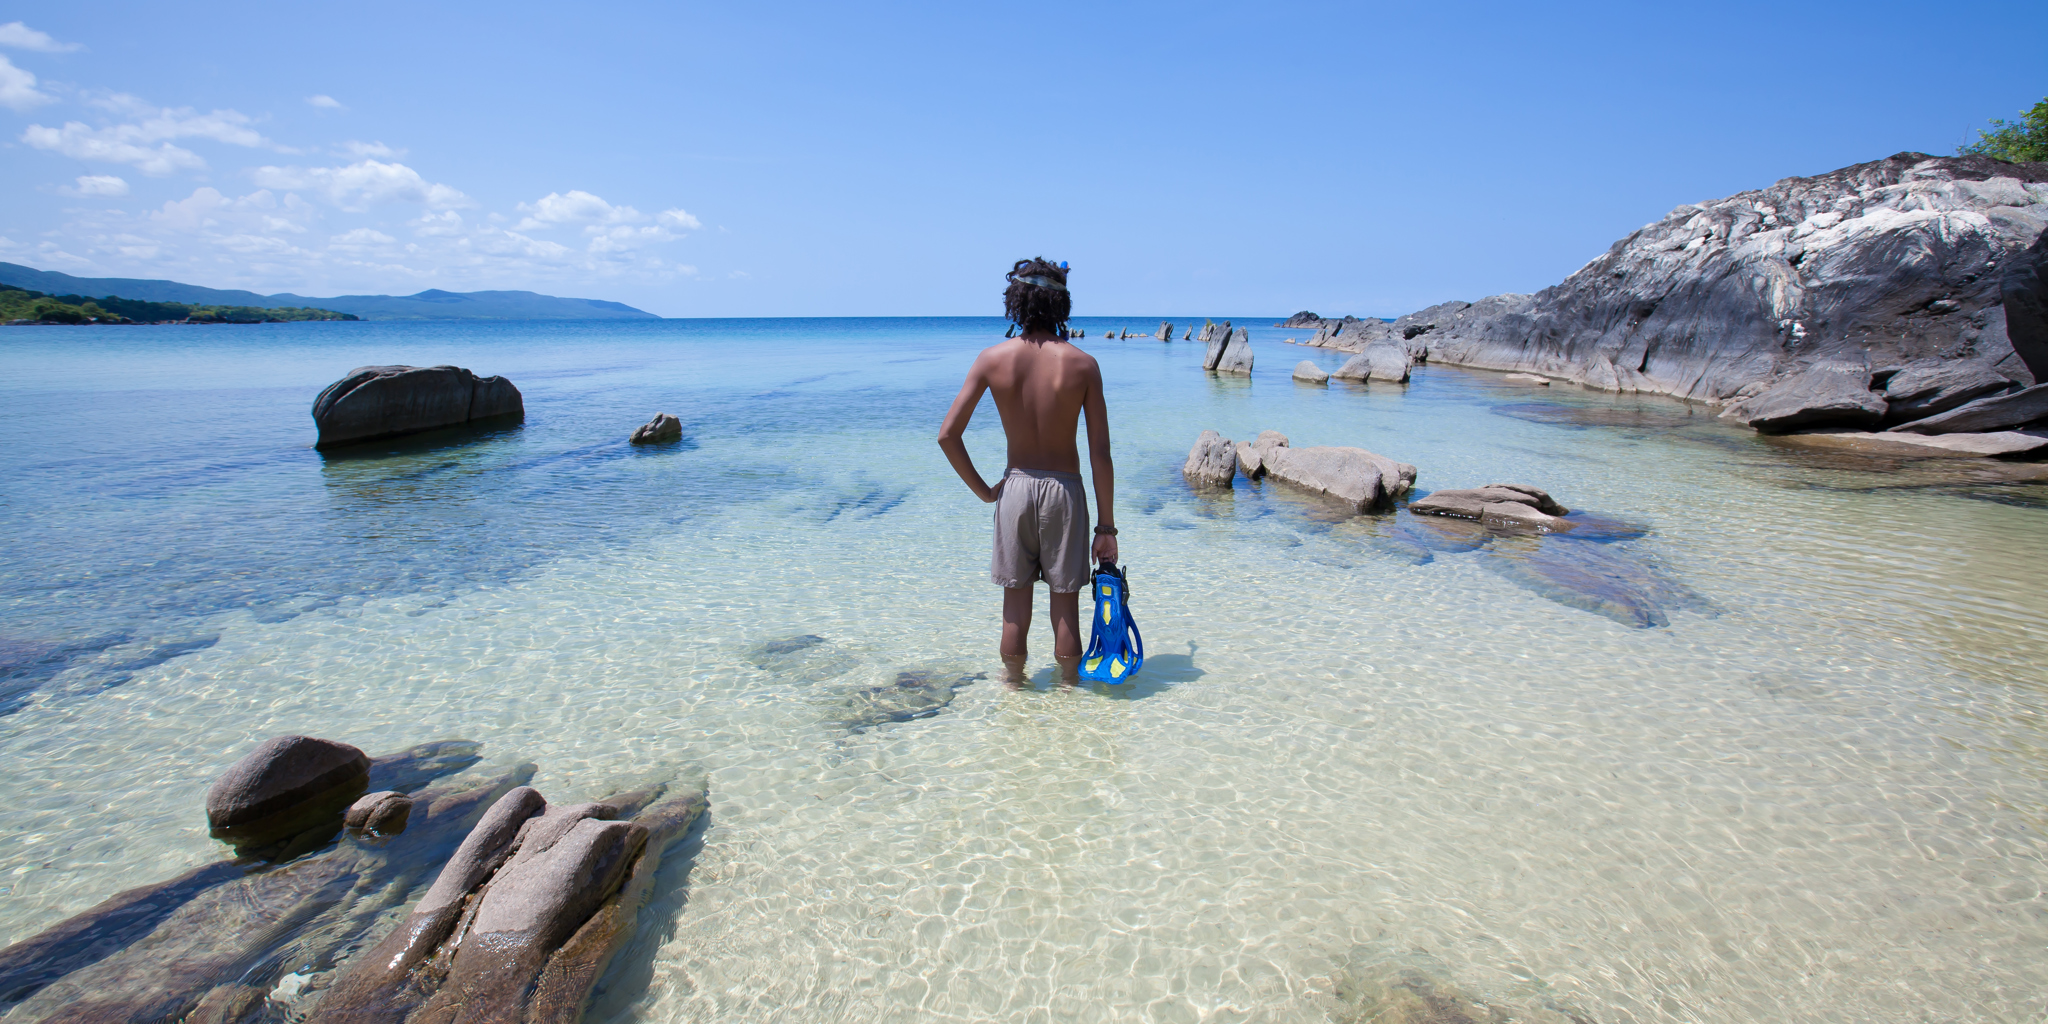 snorkelling in lake malawi and beaches, africa safaris